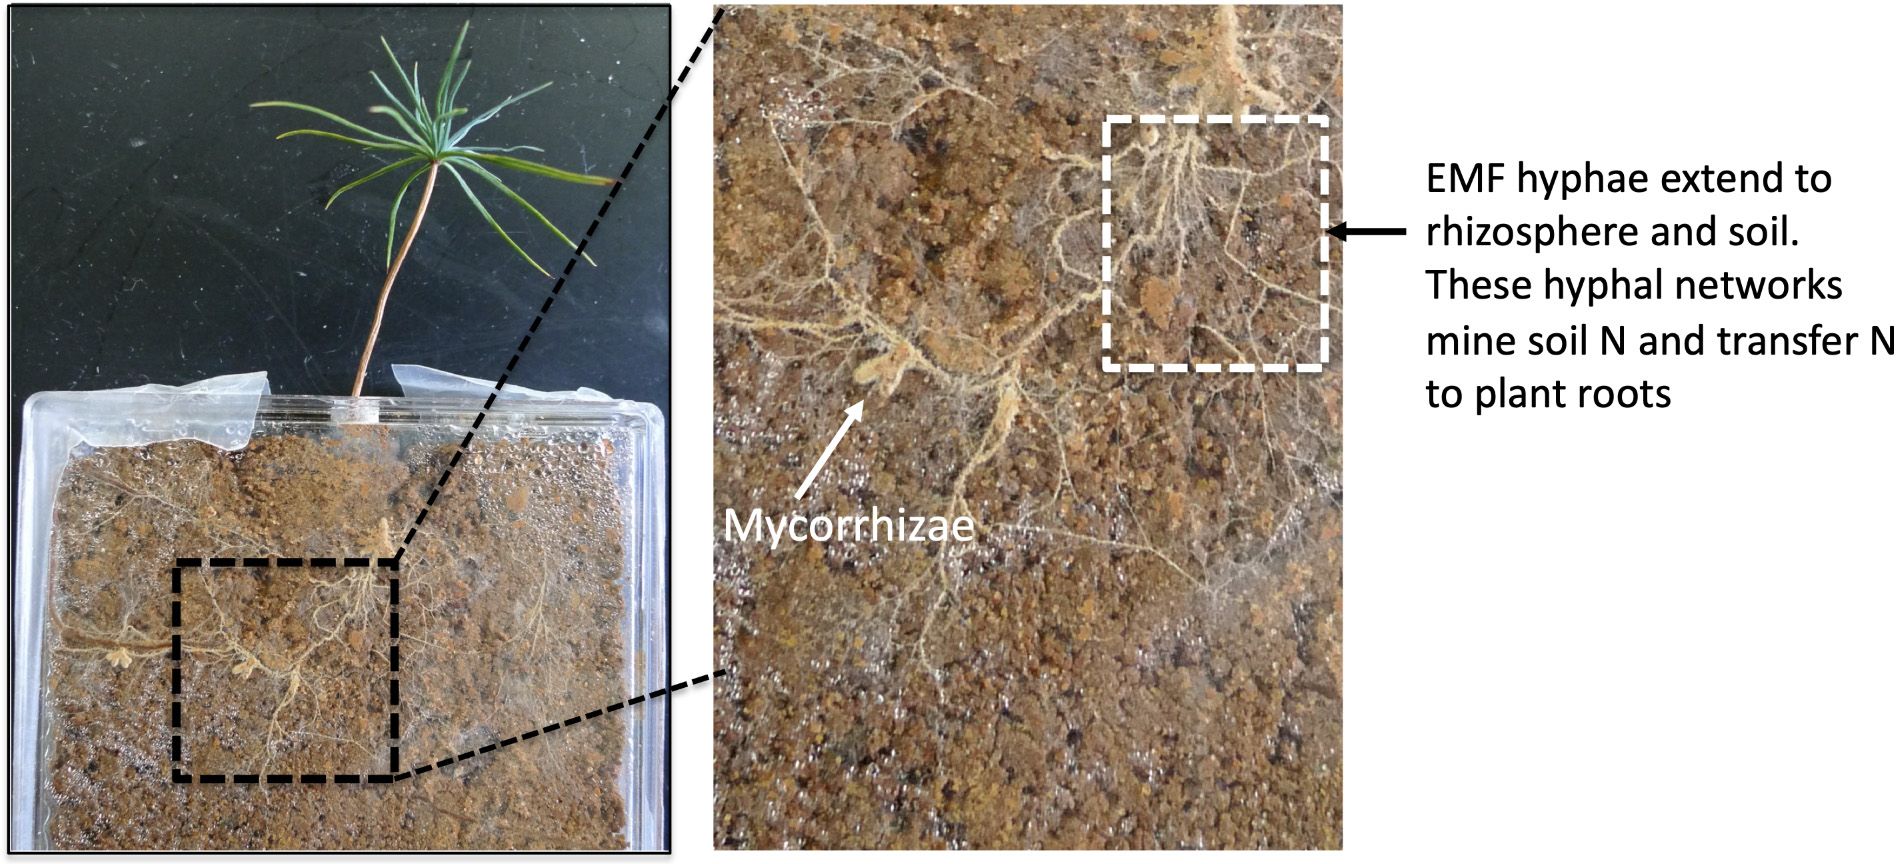 The “thread-like” hyphal networks formed by ectomycorrhizal fungi (EMF). These hyphae extend to the soil and observe the nutrients, allowing these nutrients travel between the plant roots. 